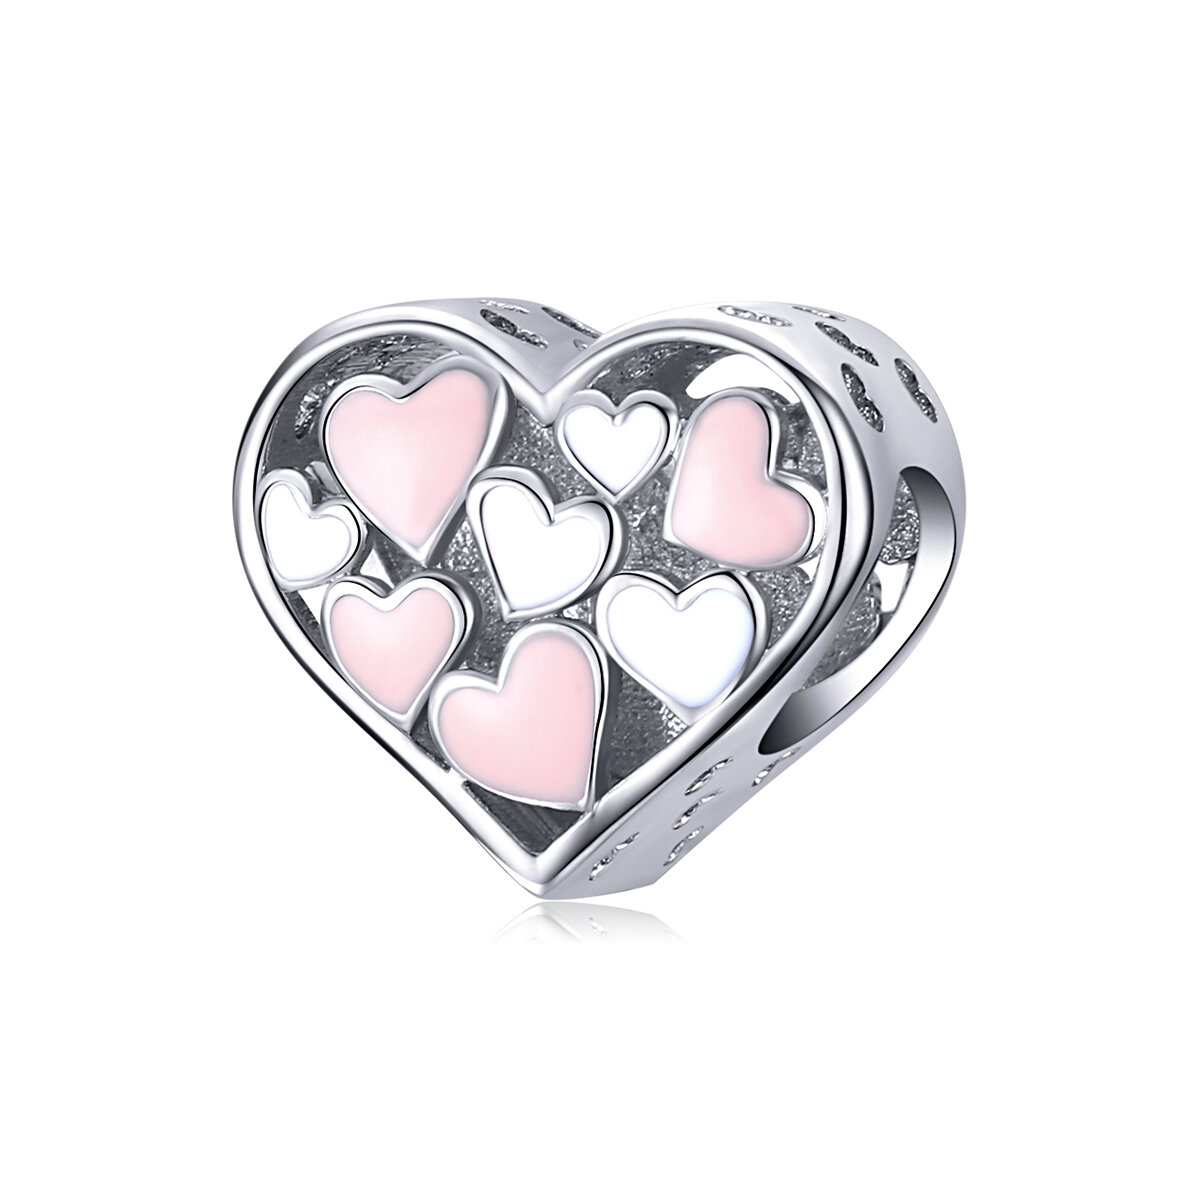 GemKing SCC1423 Romance Heart S925 Sterling Silver Charm